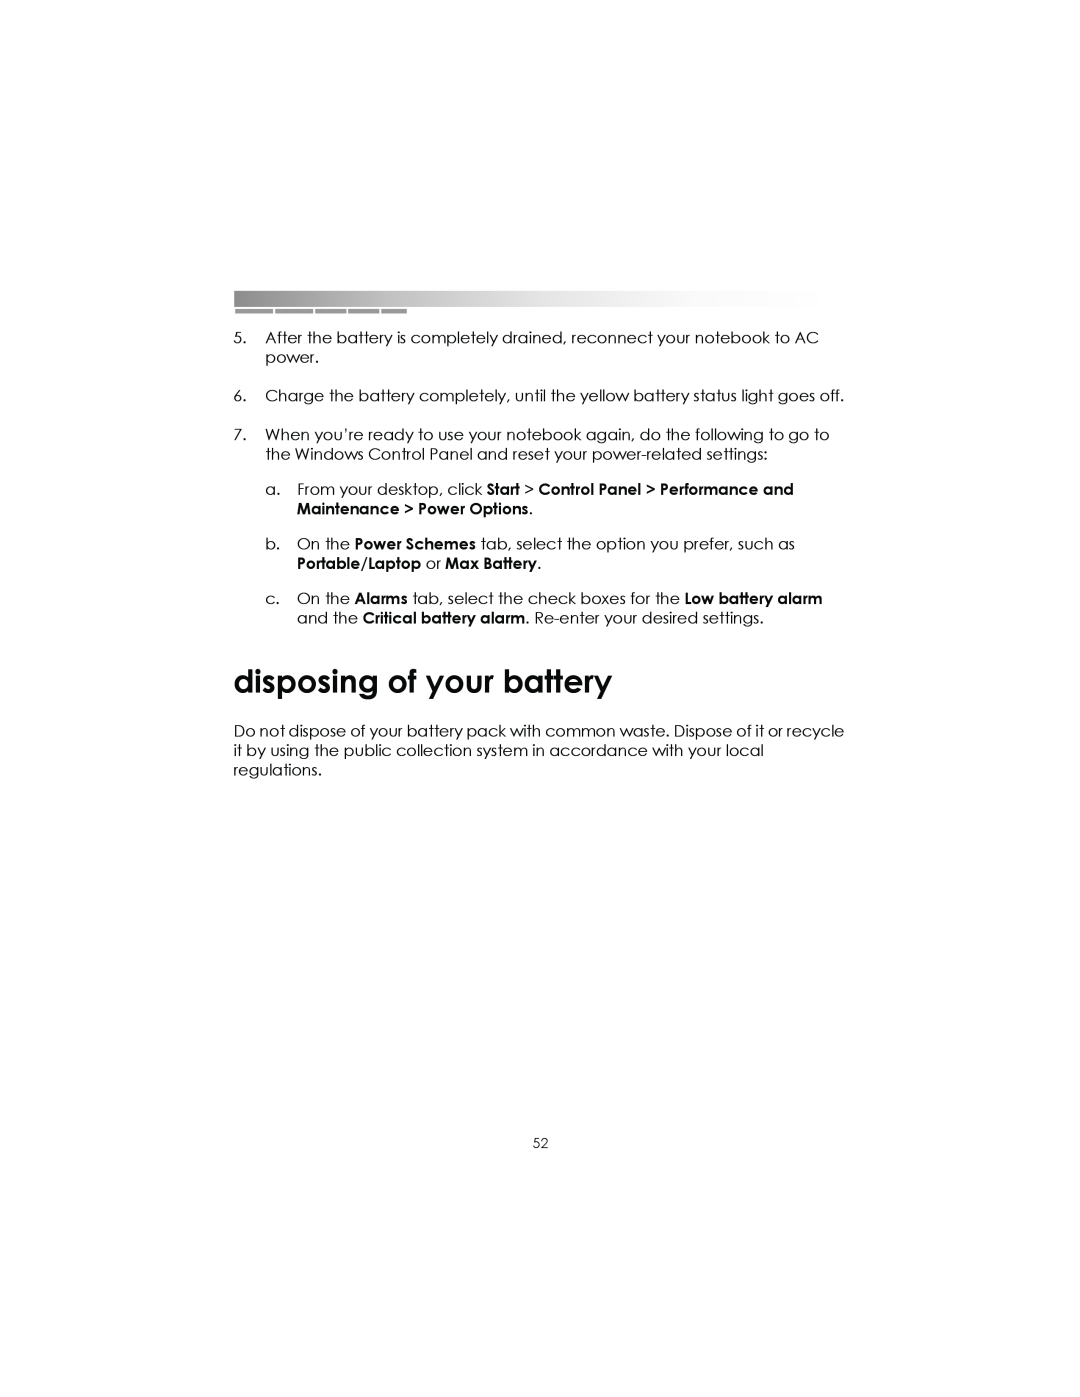 eMachines AAFW53700001K0 manual disposing of your battery 